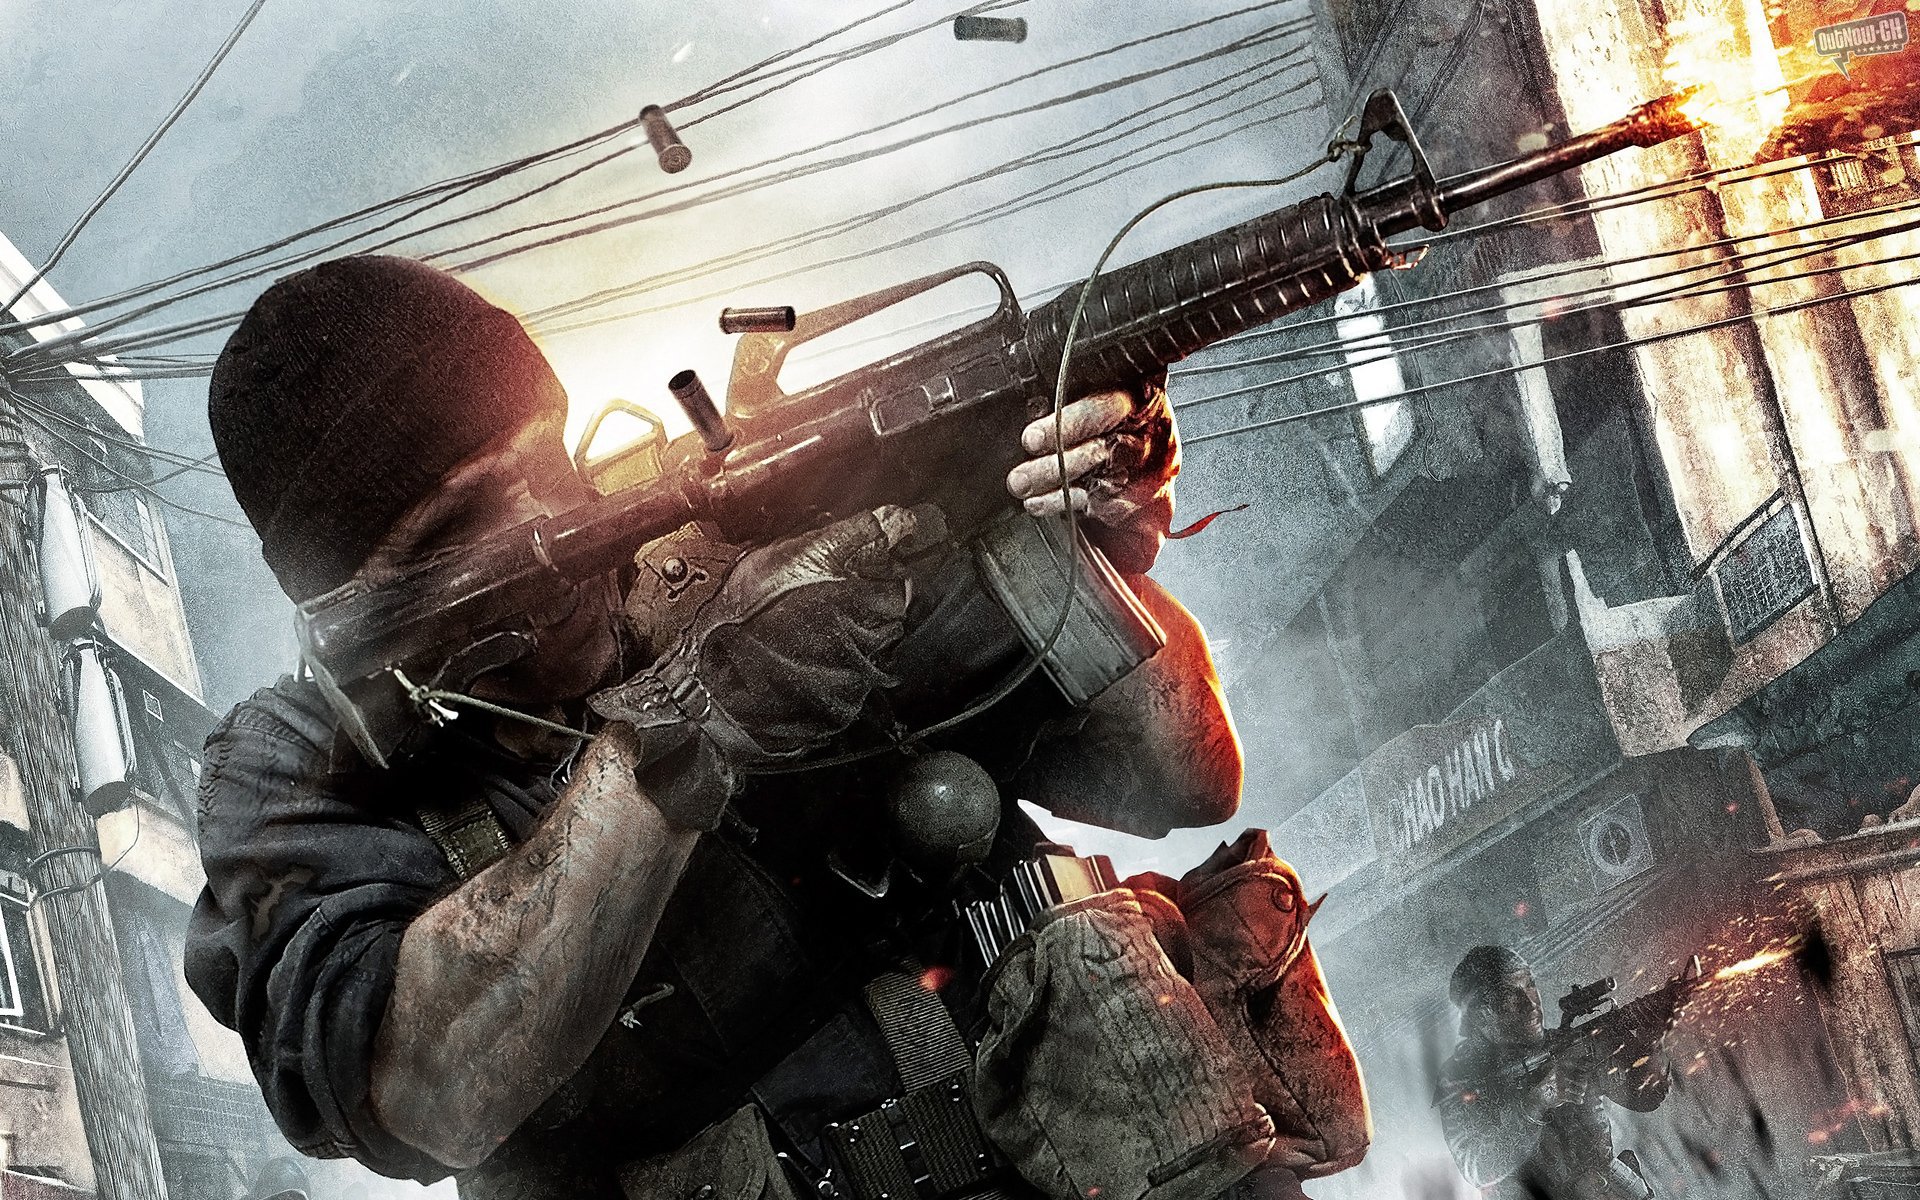  of Duty Black OPS wallpapers Call of Duty Black OPS stock photos 1920x1200